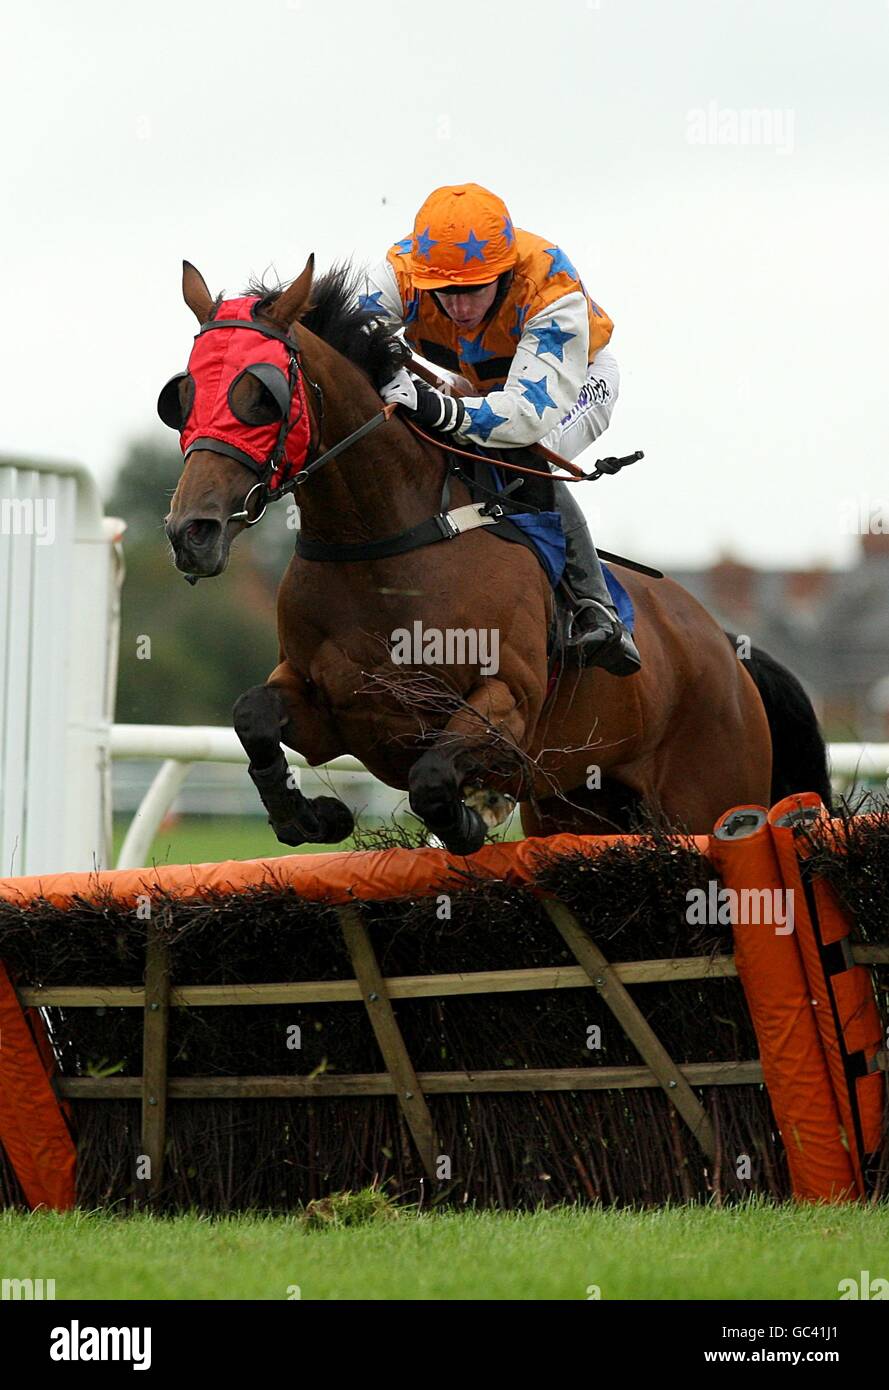 Houri, ridden by Dave Crousse, during the Leukaemia Care Handicap Hurdle Race at Hereford Racecourse Stock Photo